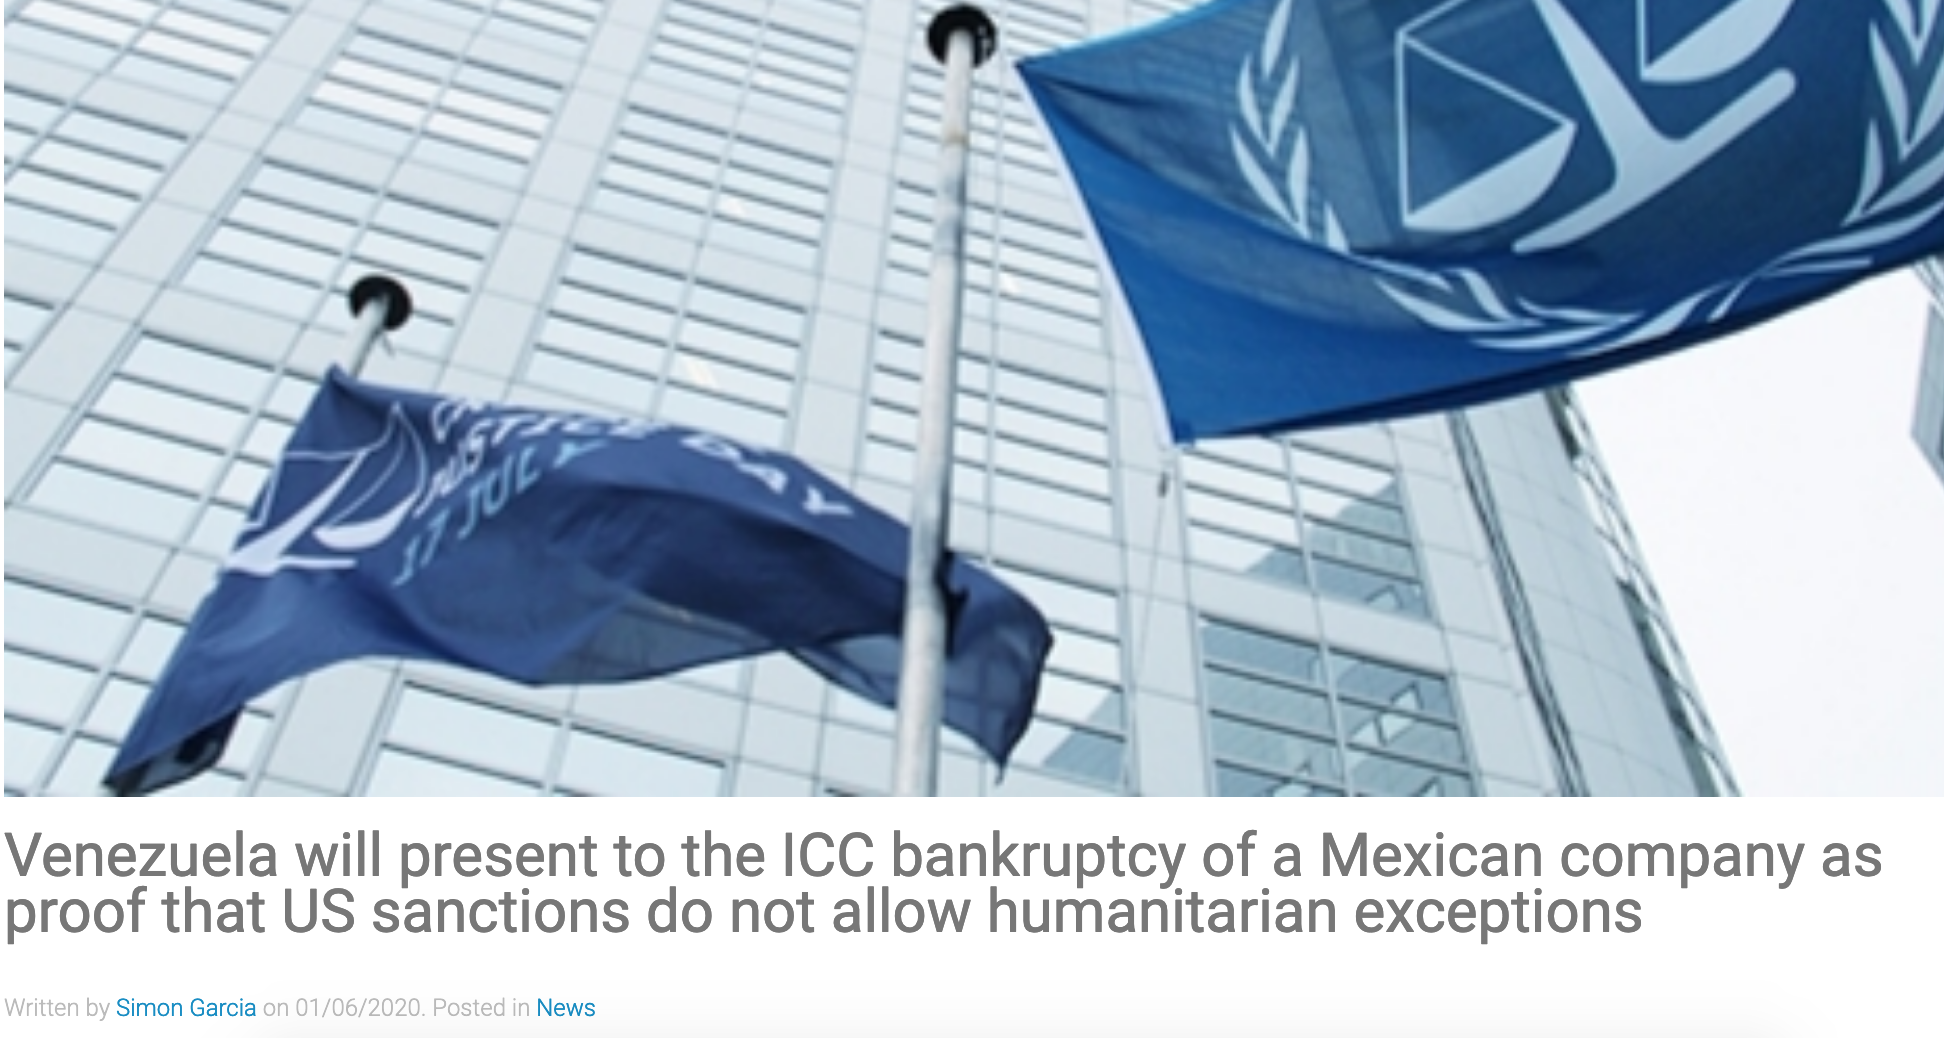 Venezuela will present to the ICC bankruptcy of a Mexican company as proof that US sanctions do not allow humanitarian exceptions